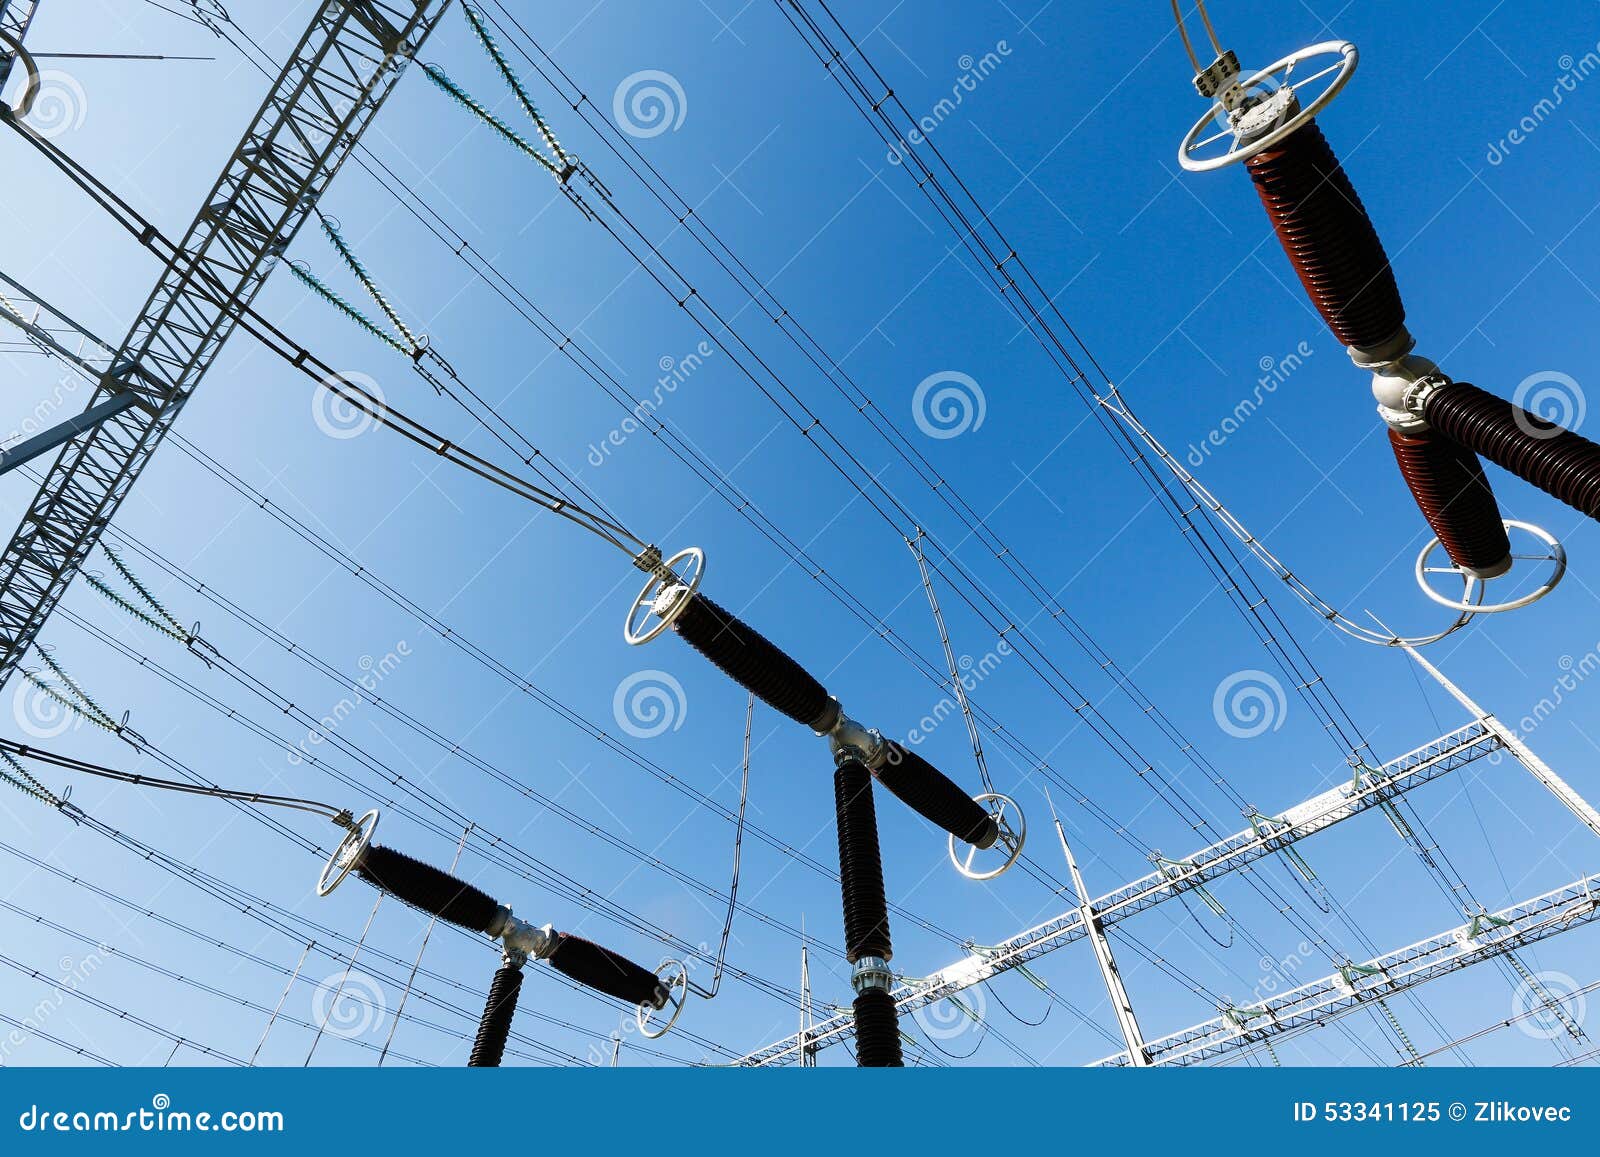 electrical surge arresters in converter station